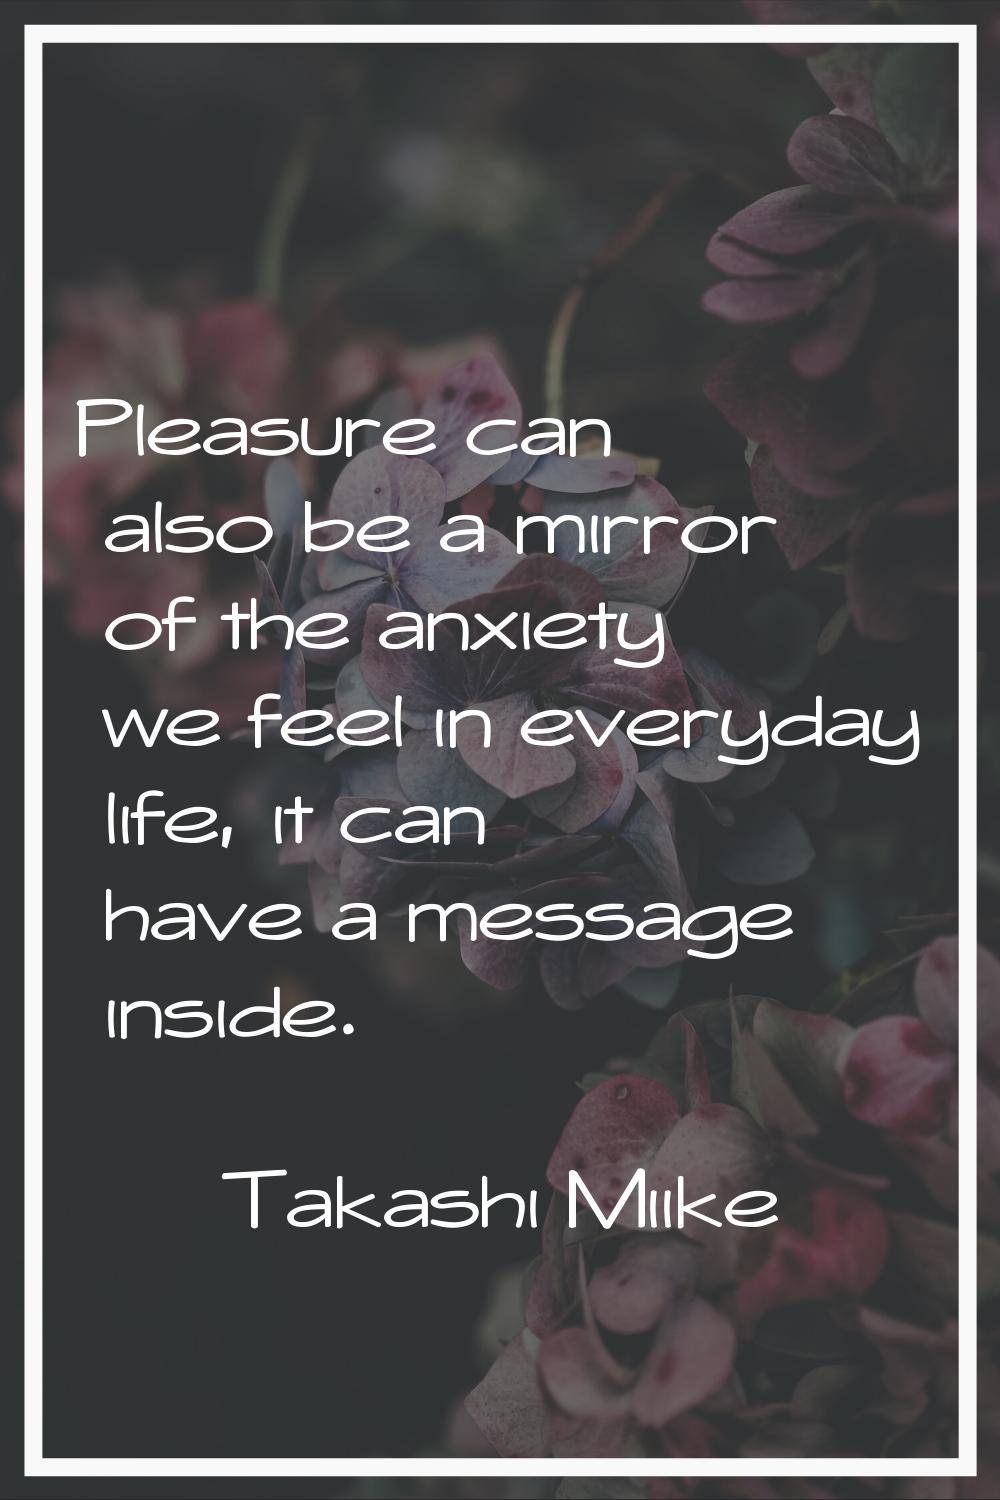 Pleasure can also be a mirror of the anxiety we feel in everyday life, it can have a message inside